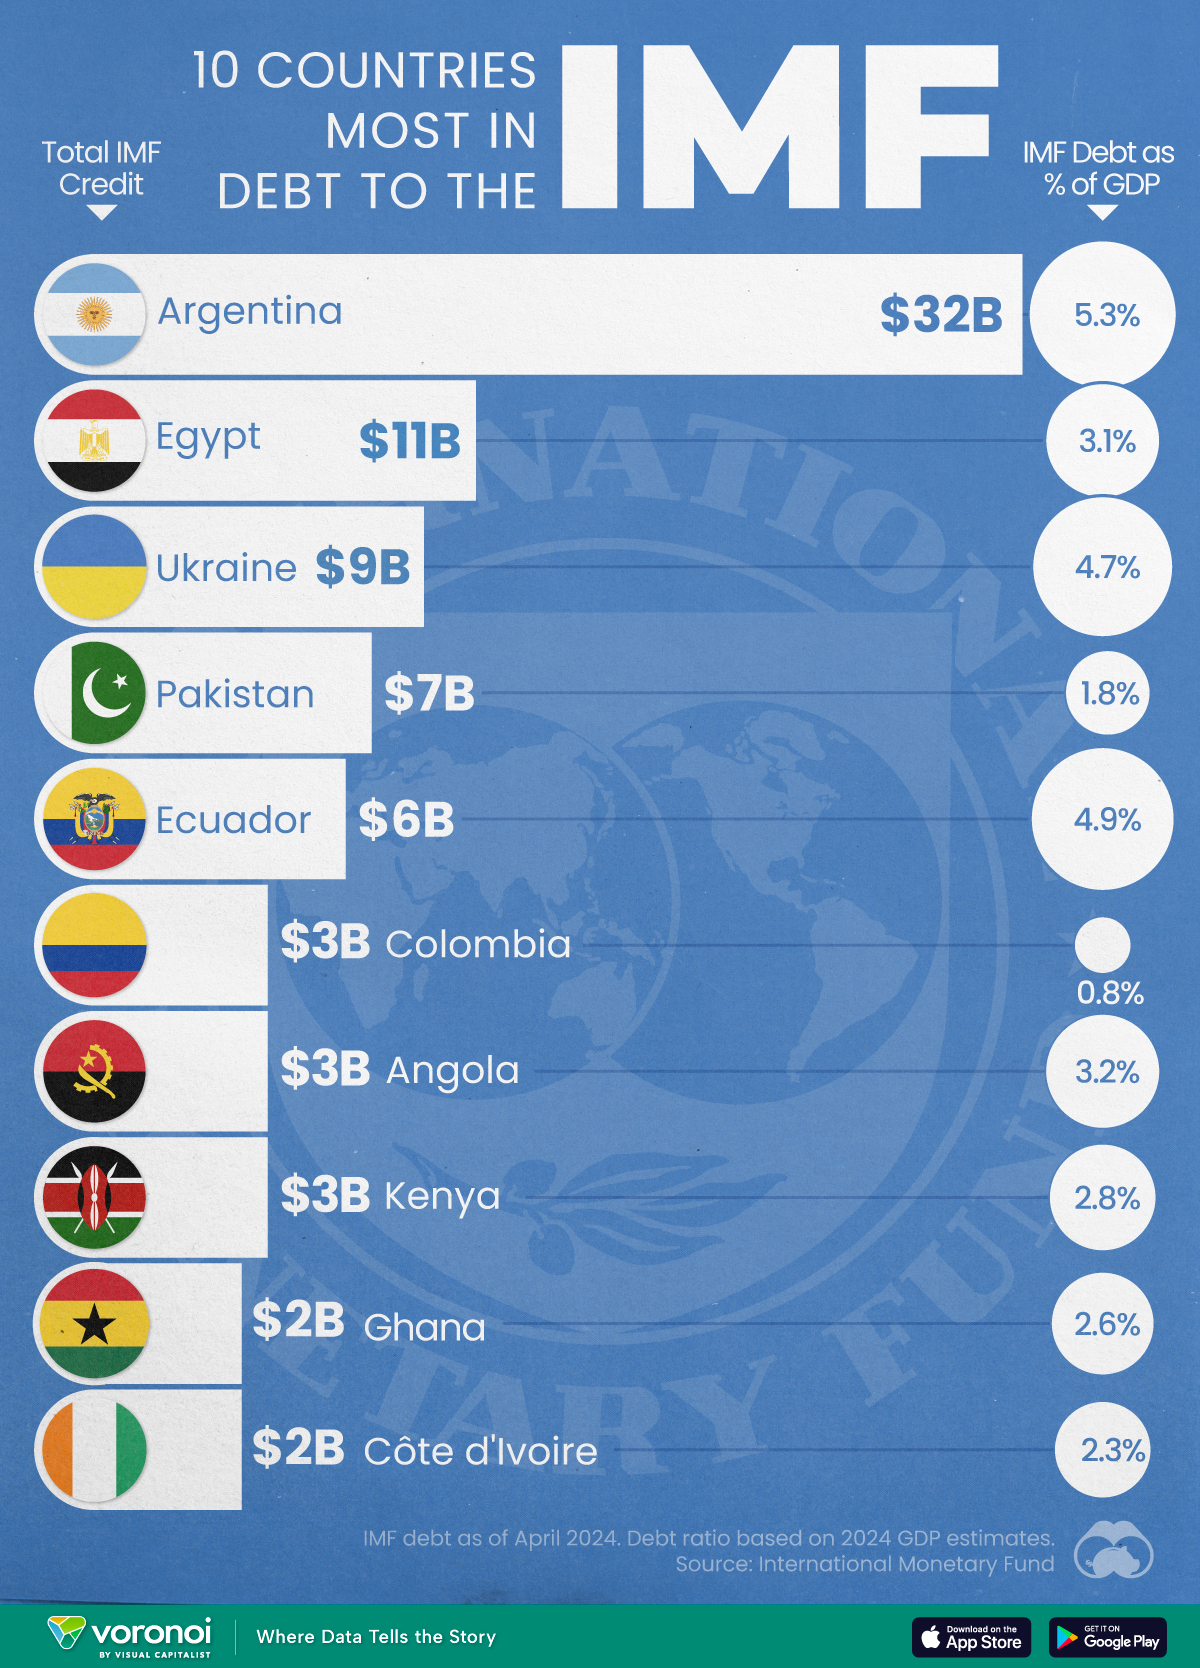 Ghana Ranked 9th Position Among Top 10 Countries Most in Debt to the IMF